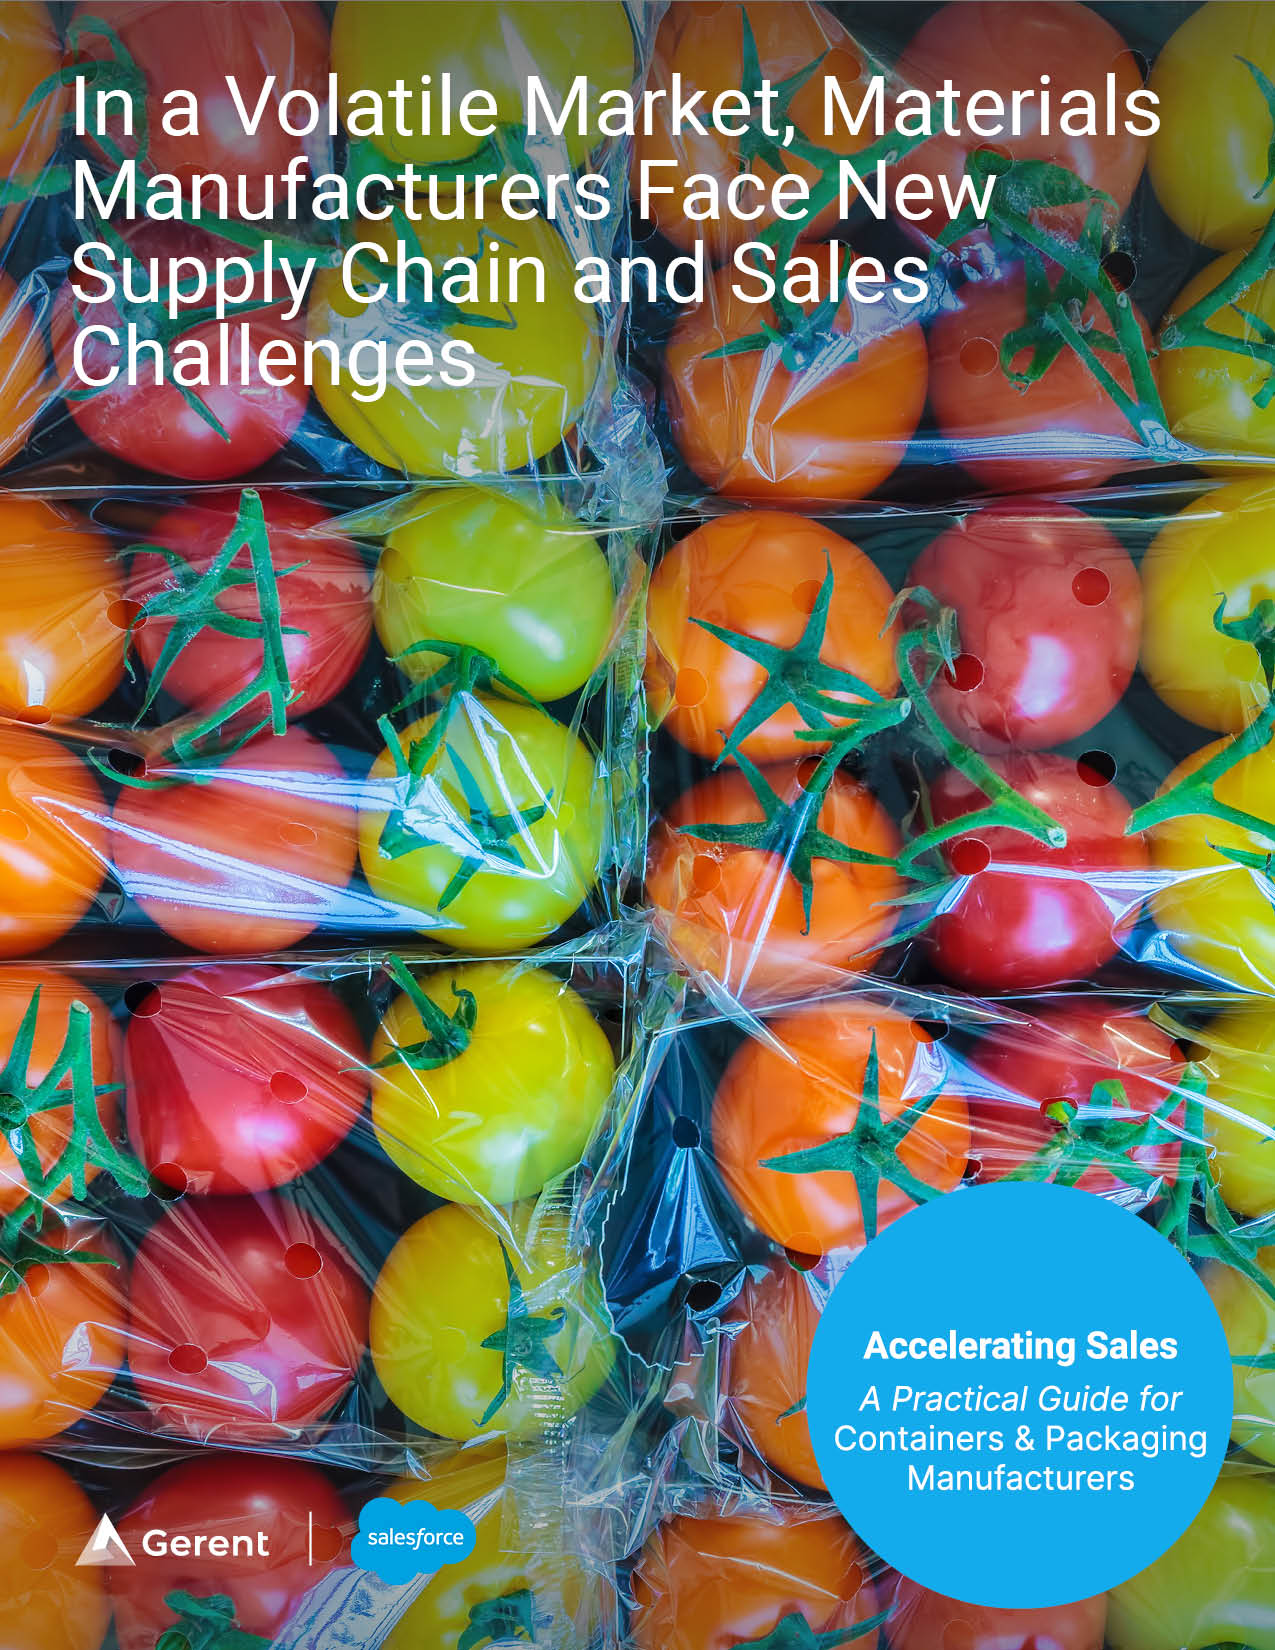 In a Volatile Market, Materials Manufacturers Face New Supply Chain and
Sales Challenges